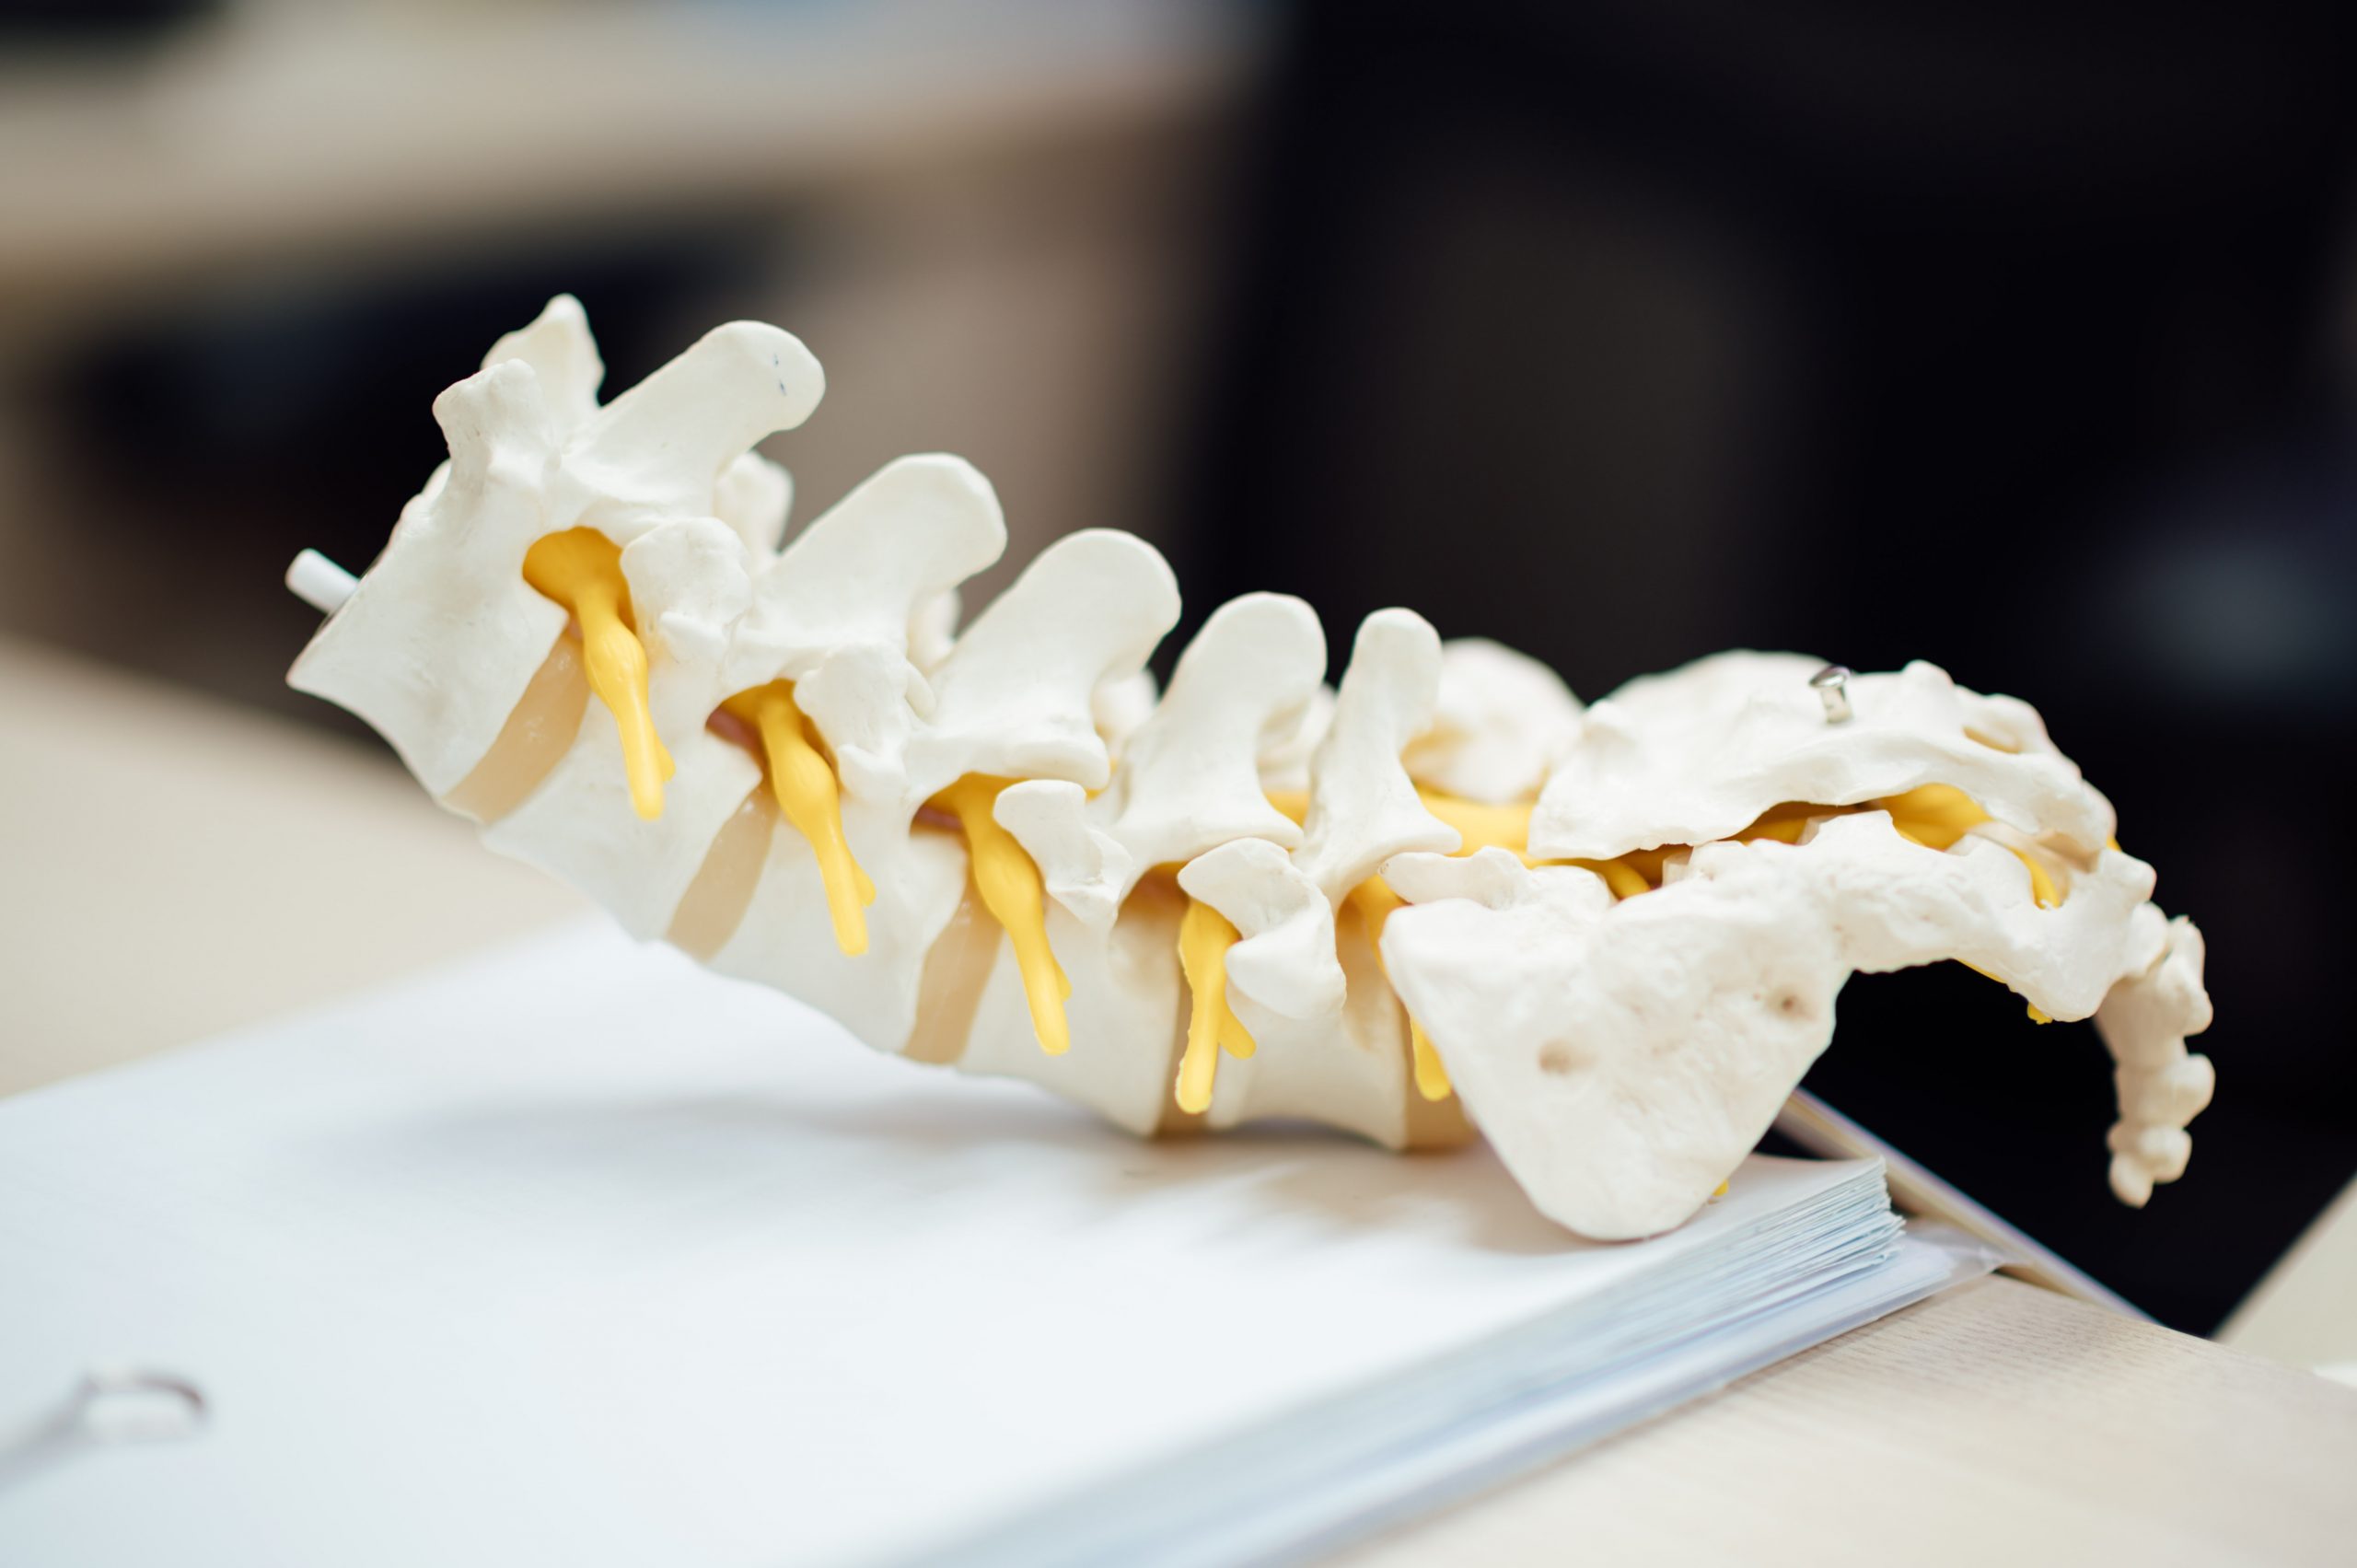 Spine model | Featured image for Have a Slipped Disc?